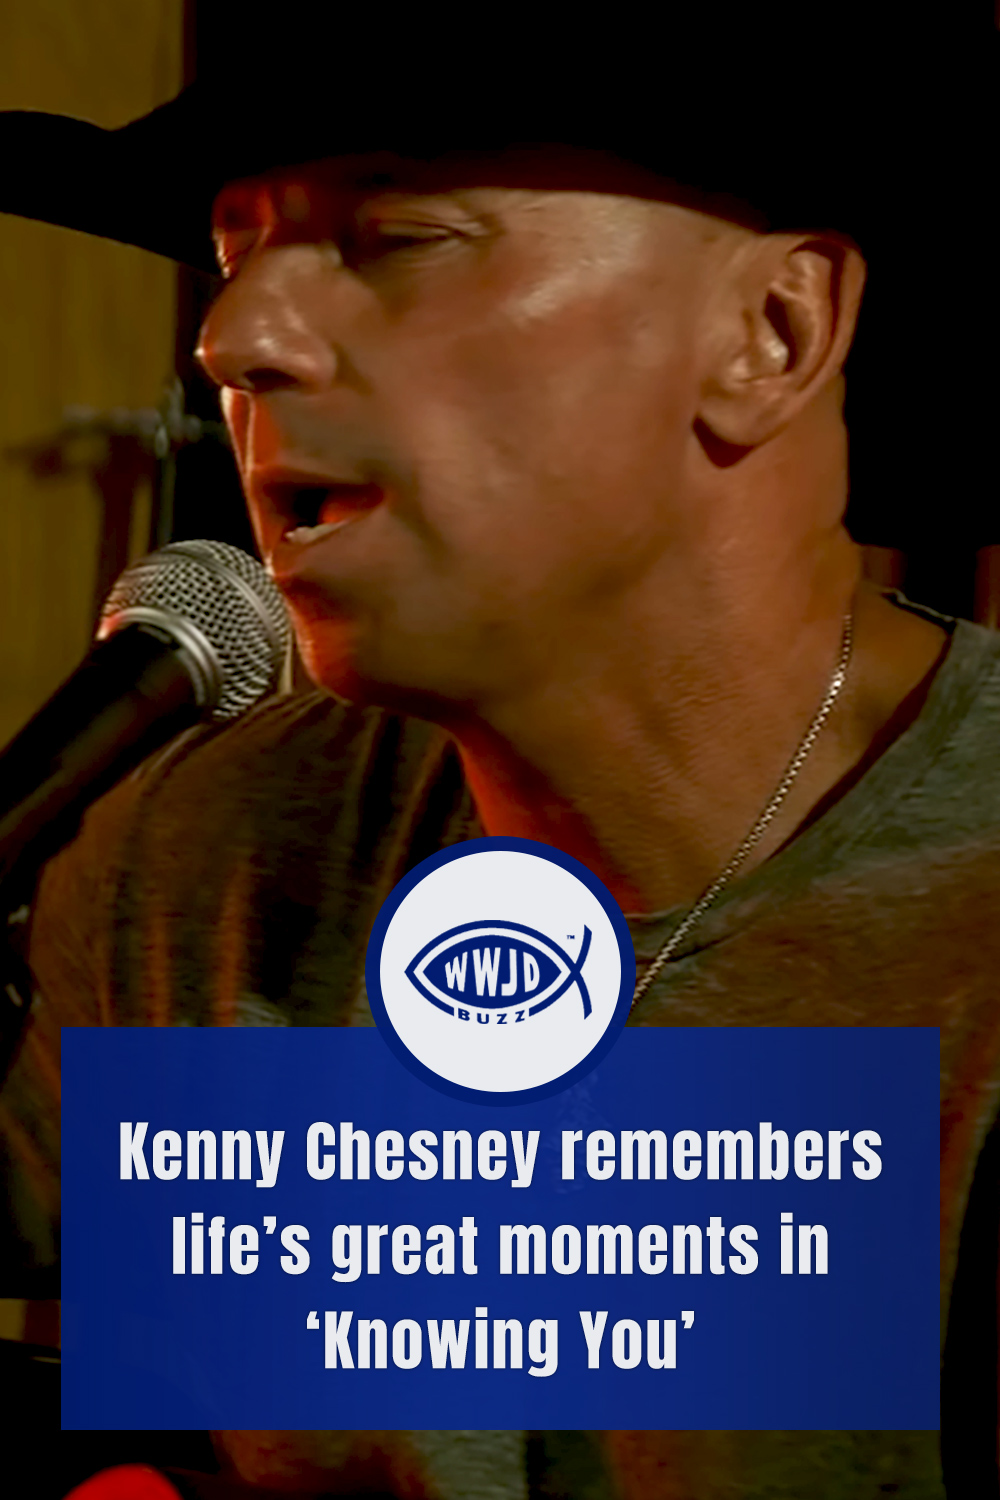 Kenny Chesney remembers life’s great moments in ‘Knowing You’